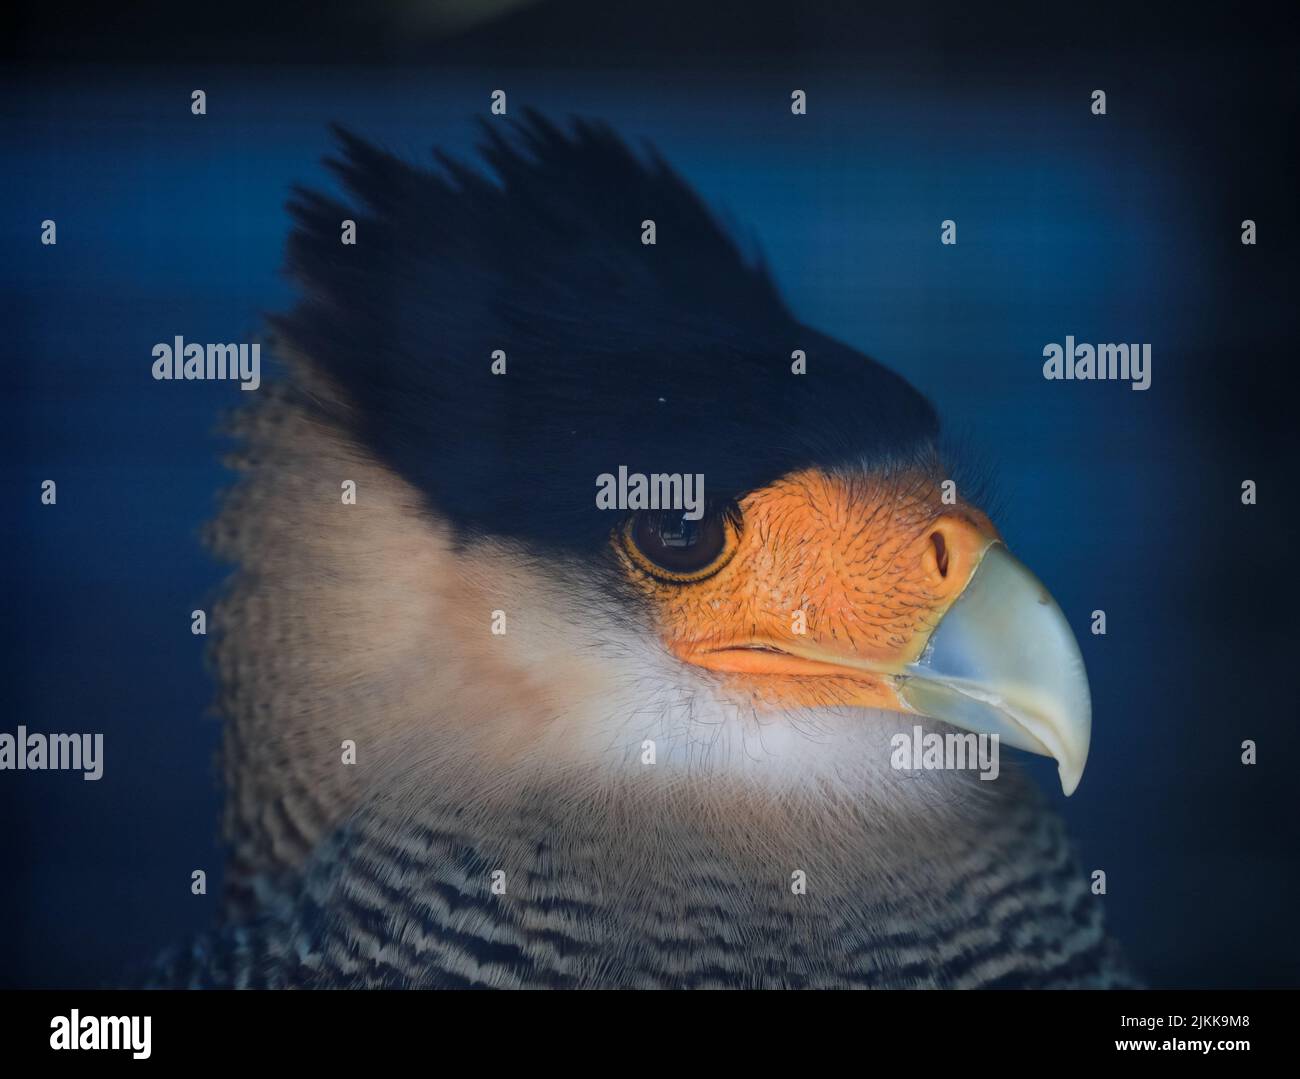 A beautiful portrait of a southern crested caracara in bright sunlit on a blurred blue background Stock Photo